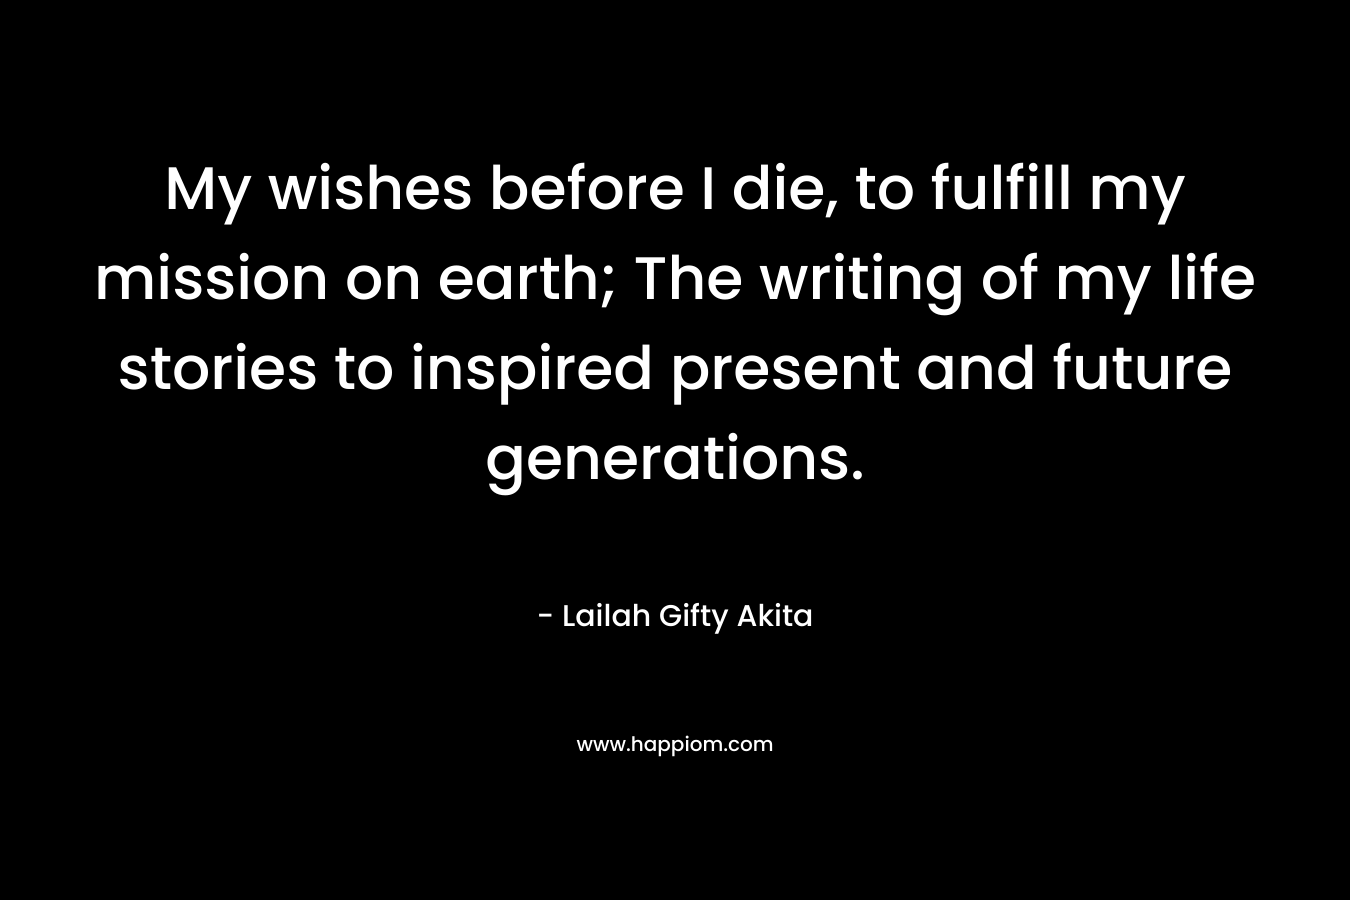 My wishes before I die, to fulfill my mission on earth; The writing of my life stories to inspired present and future generations.